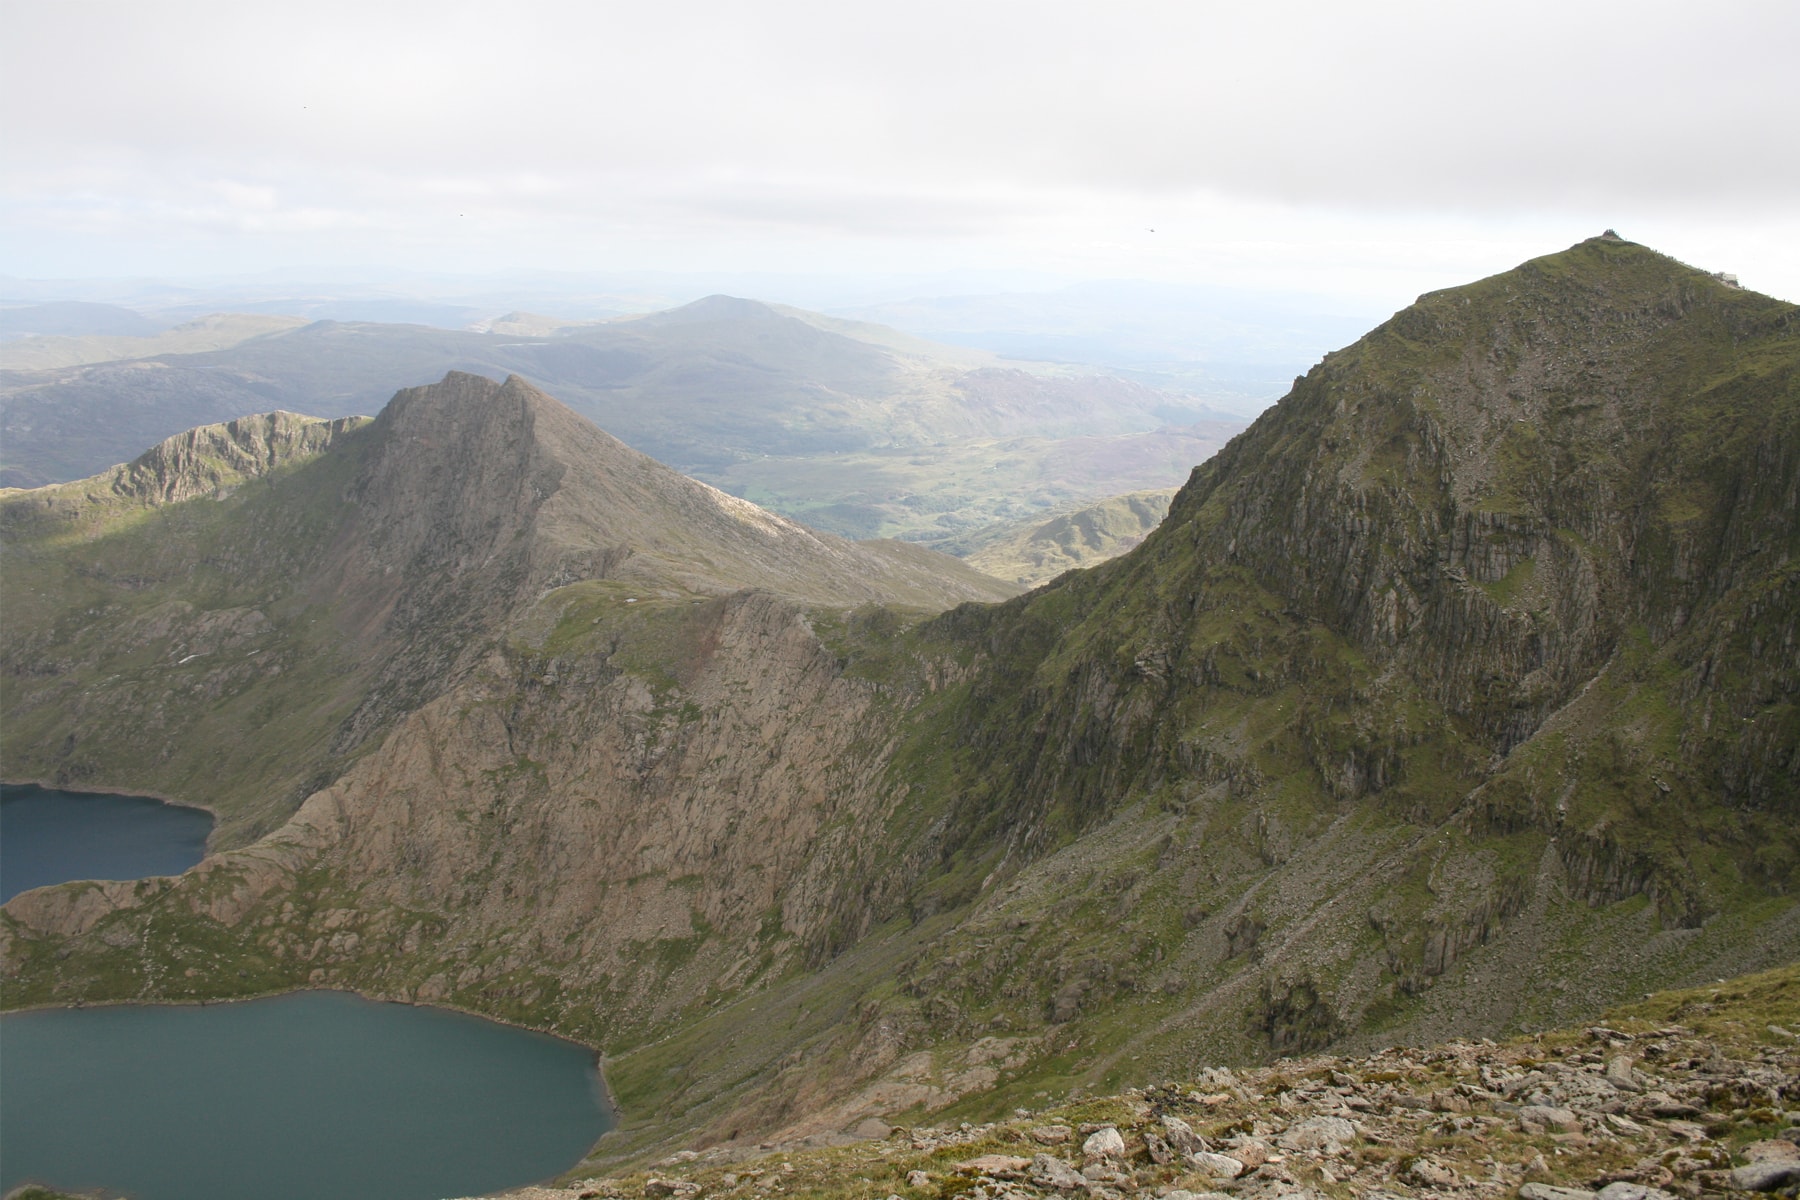 Spaces available for Three Peaks Challenge